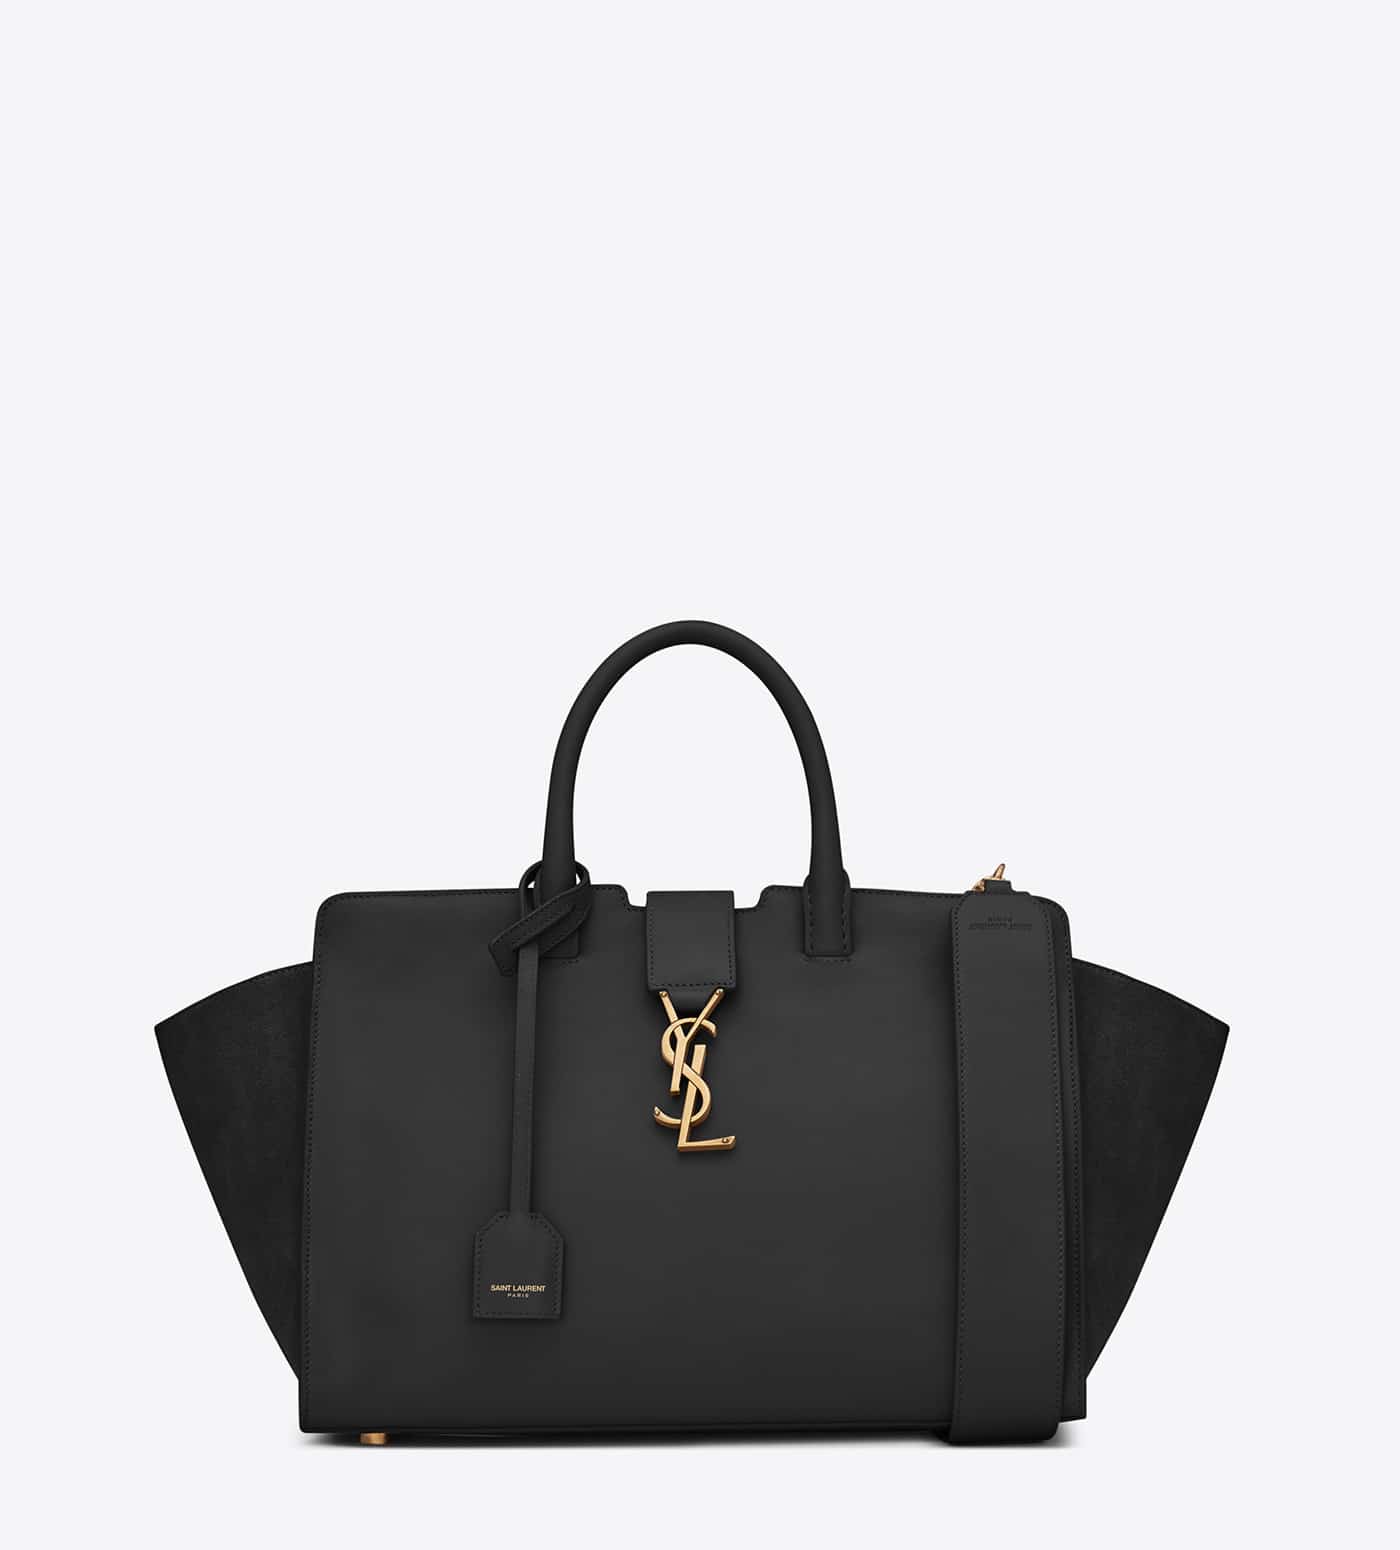 New Saint Laurent Monogram Cabas Bag From Pre-Fall 2016 - Spotted Fashion